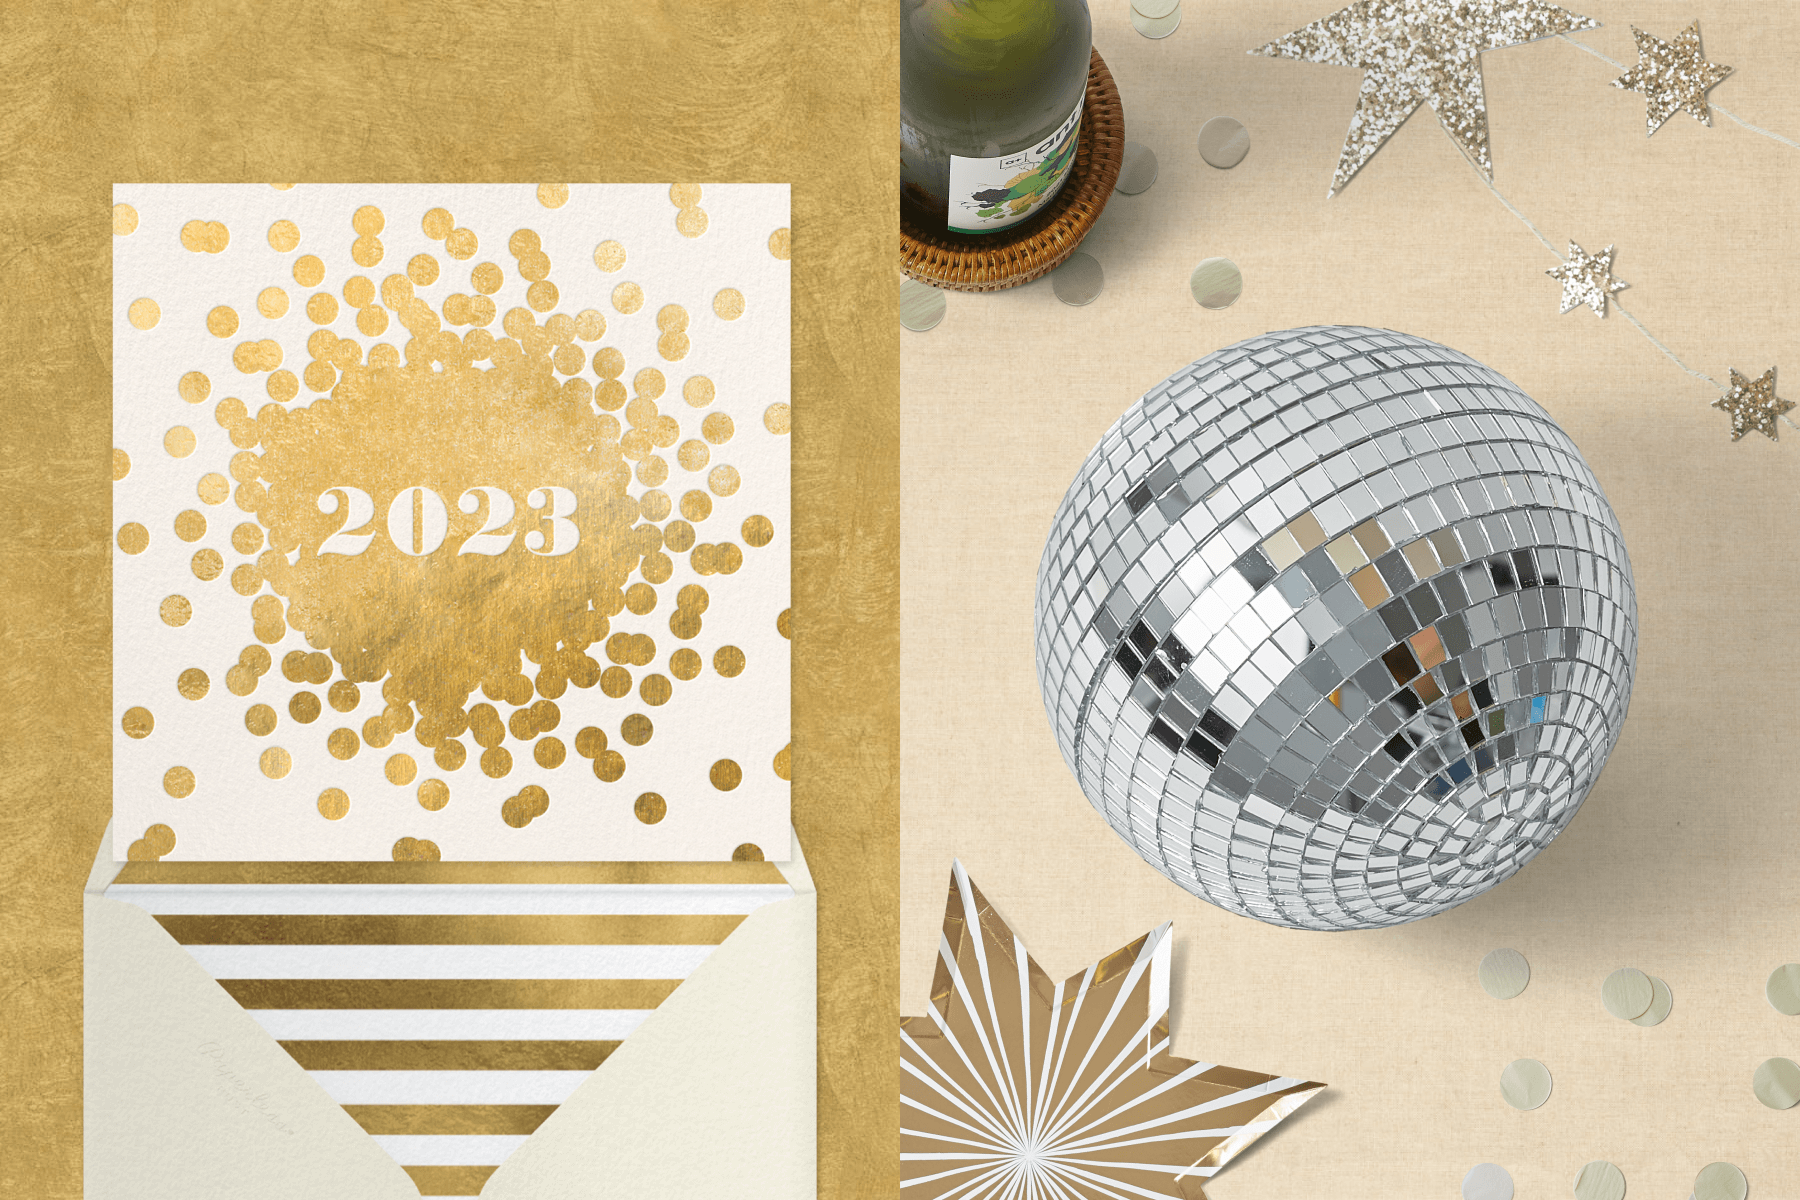 Left: A white and gold New Year’s Eve invitation featuring gold polka dots and a gold circle in the middle that reads “2023”; right: Party Shop decor items including a disco ball, a star plate, a star banner, and a bottle of wine on a coaster.